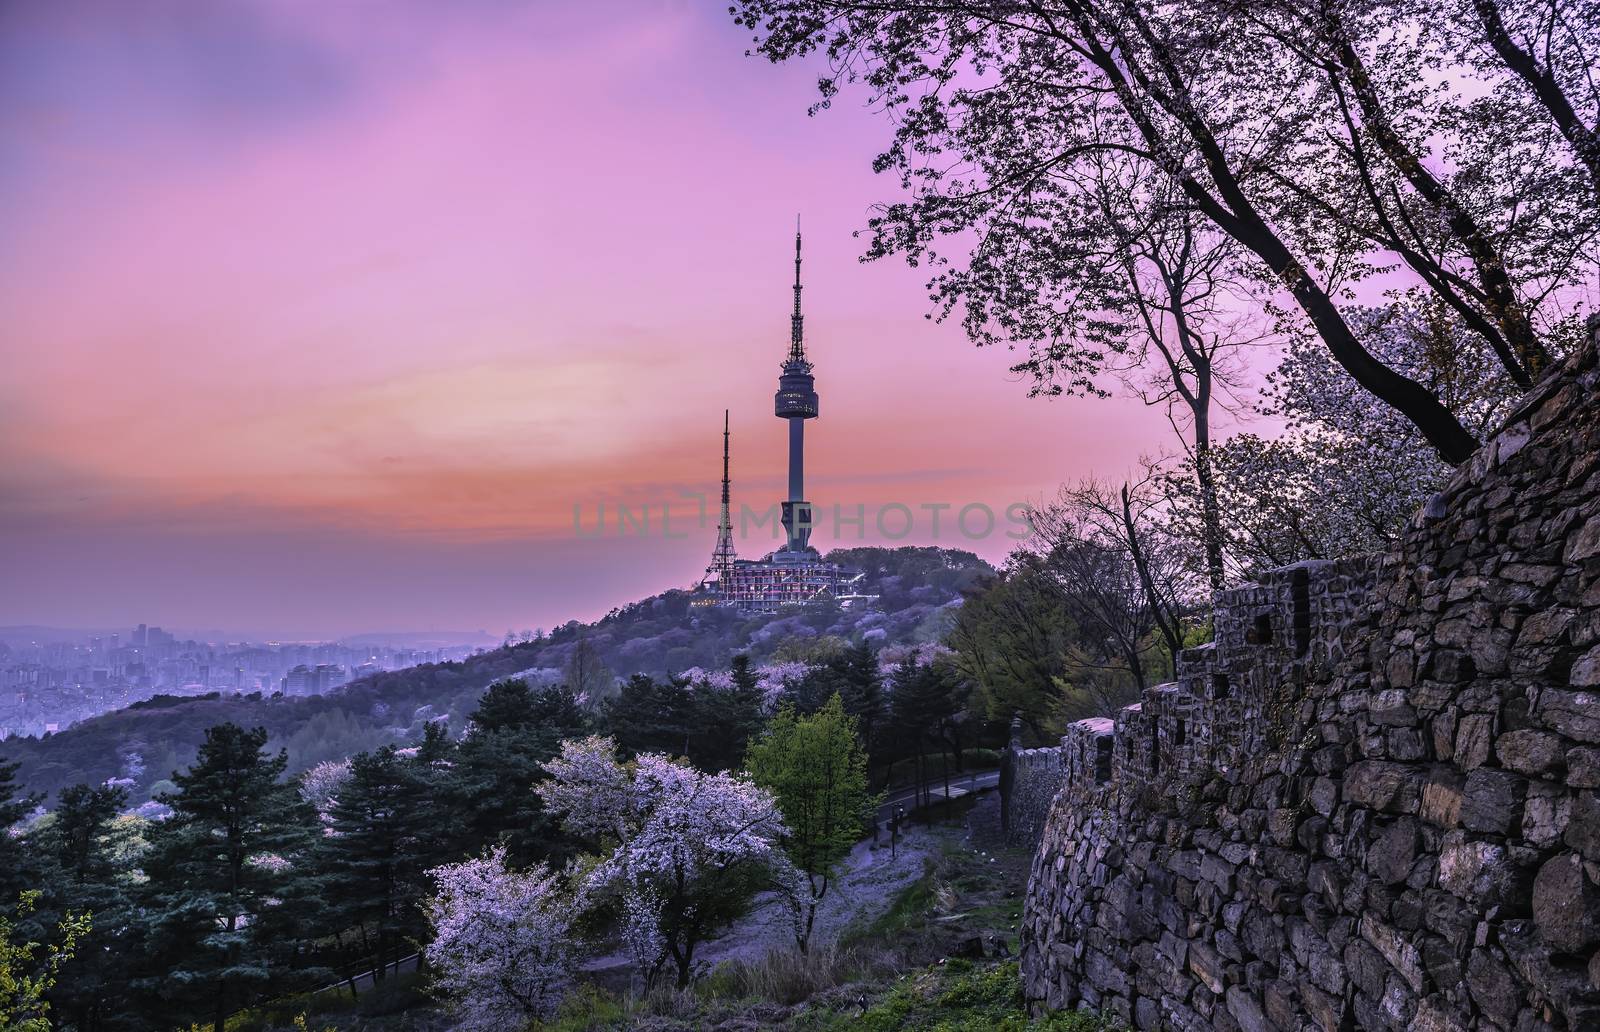 Twilight Seoul Tower in Spring at south korea by wijitamkapet@gmail.com